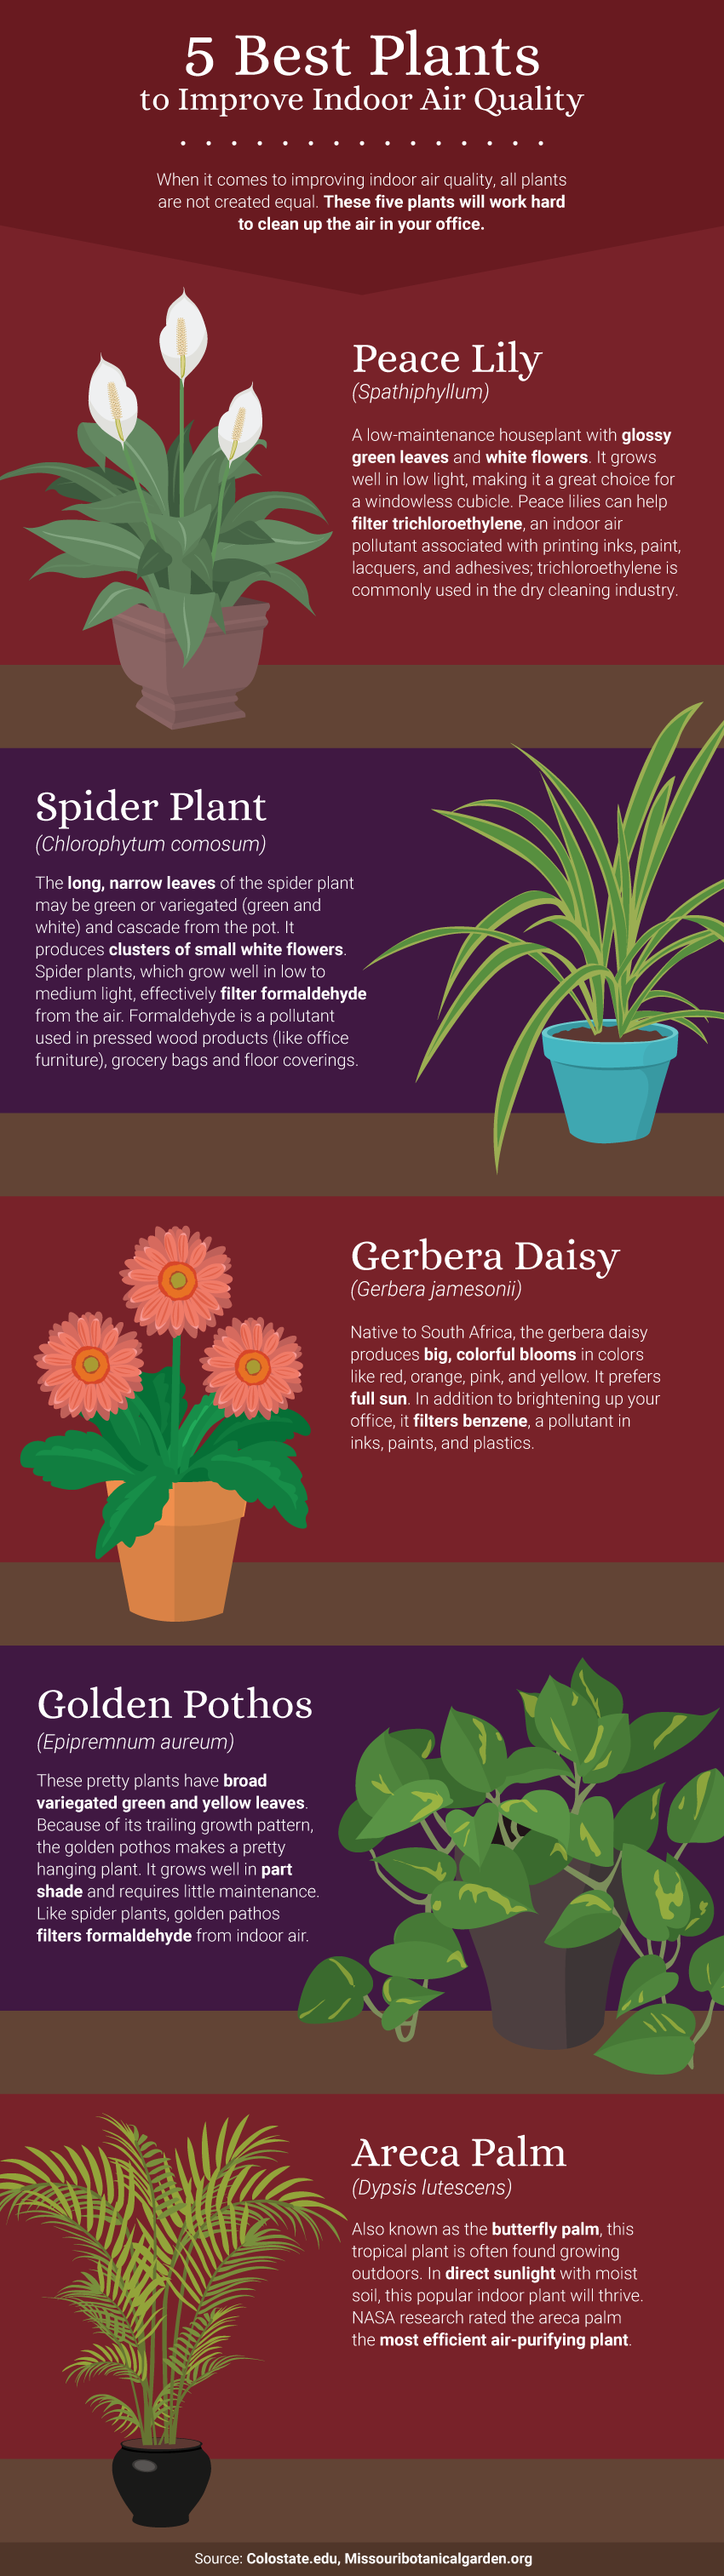 a chart detailing the five best plants that improve indoor air quality: peace lily, spider plant, gerbera daisy, golden pothos, and areca palm